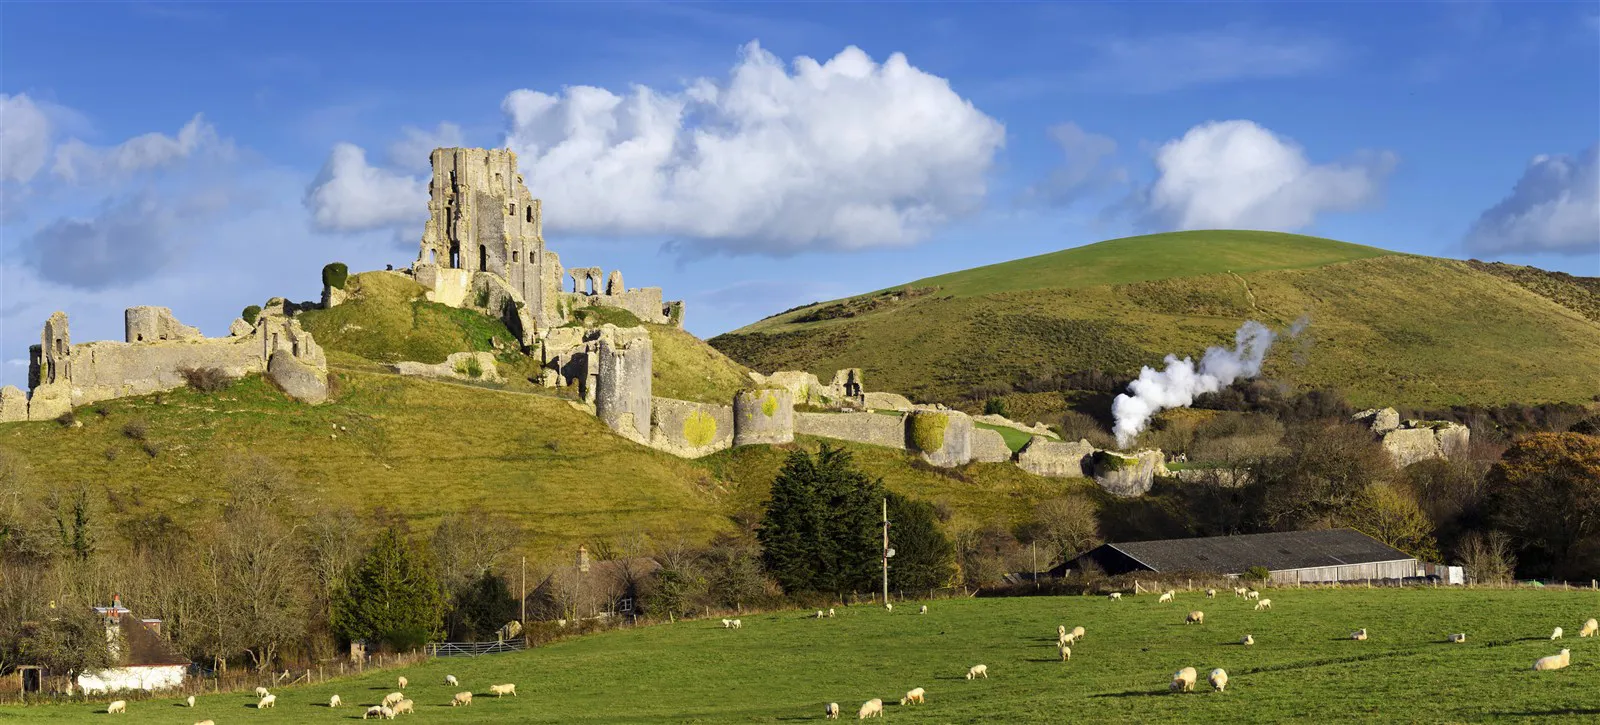 5 incredible Dorset castles we think you should see